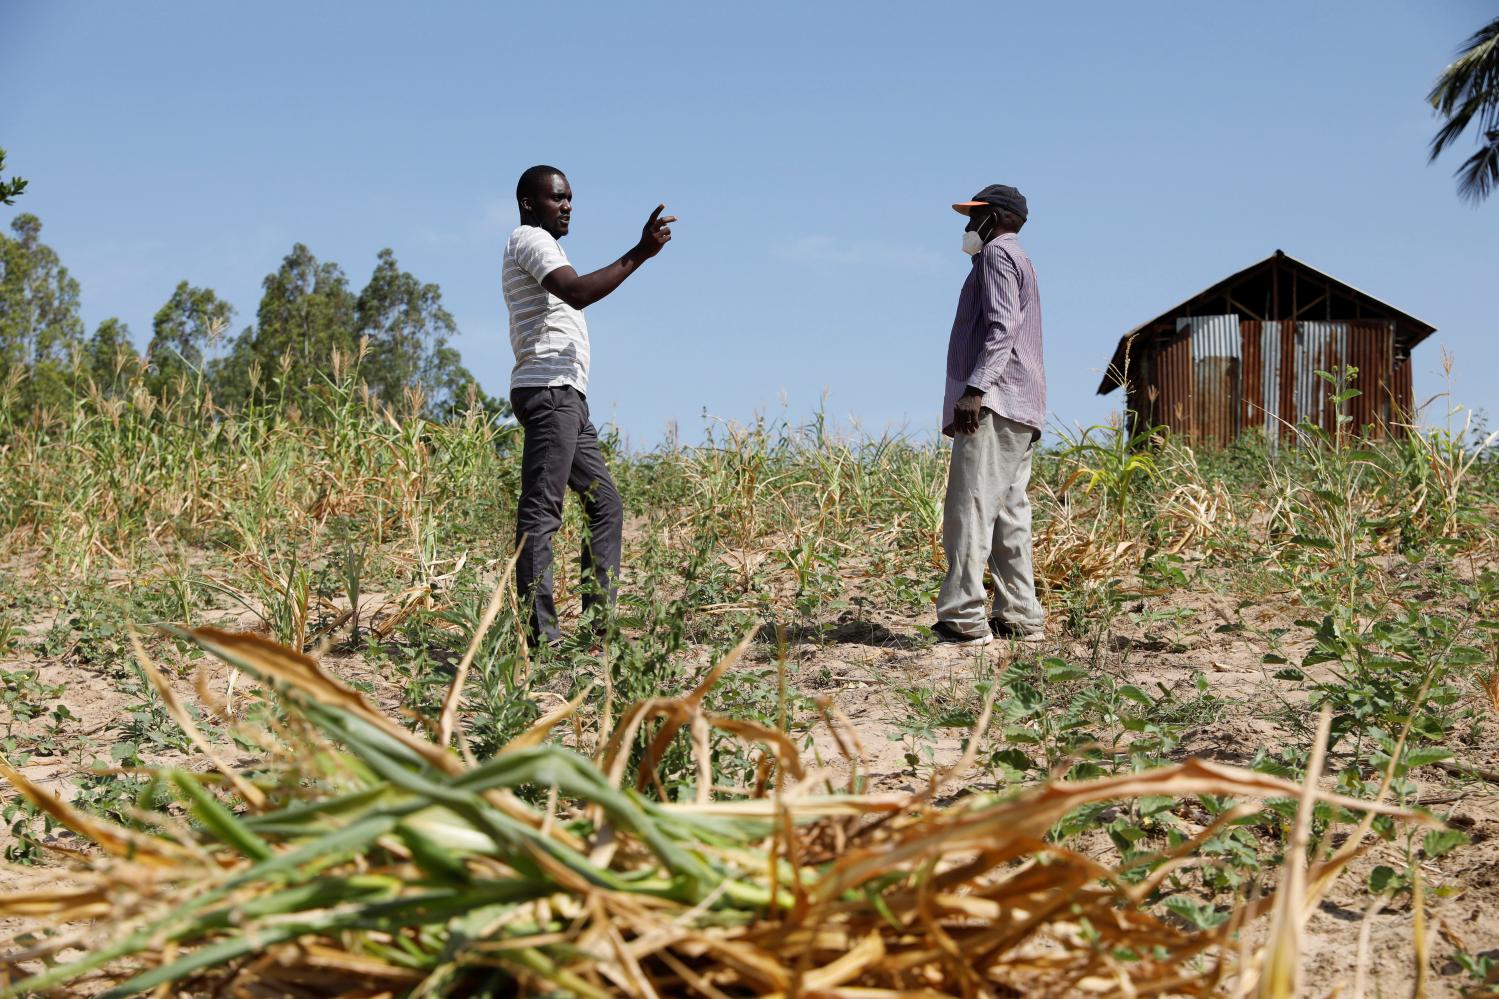 Famine Early Warning System Network in Africa (FEWS NET) scientist Chris Shitote talks to farmer Bernard Mbithi after he uprooted his maize field that failed because of a drought in Kilifi county, Kenya, February 16, 2022. Picture taken February 16, 2022. REUTERS/Baz Ratner